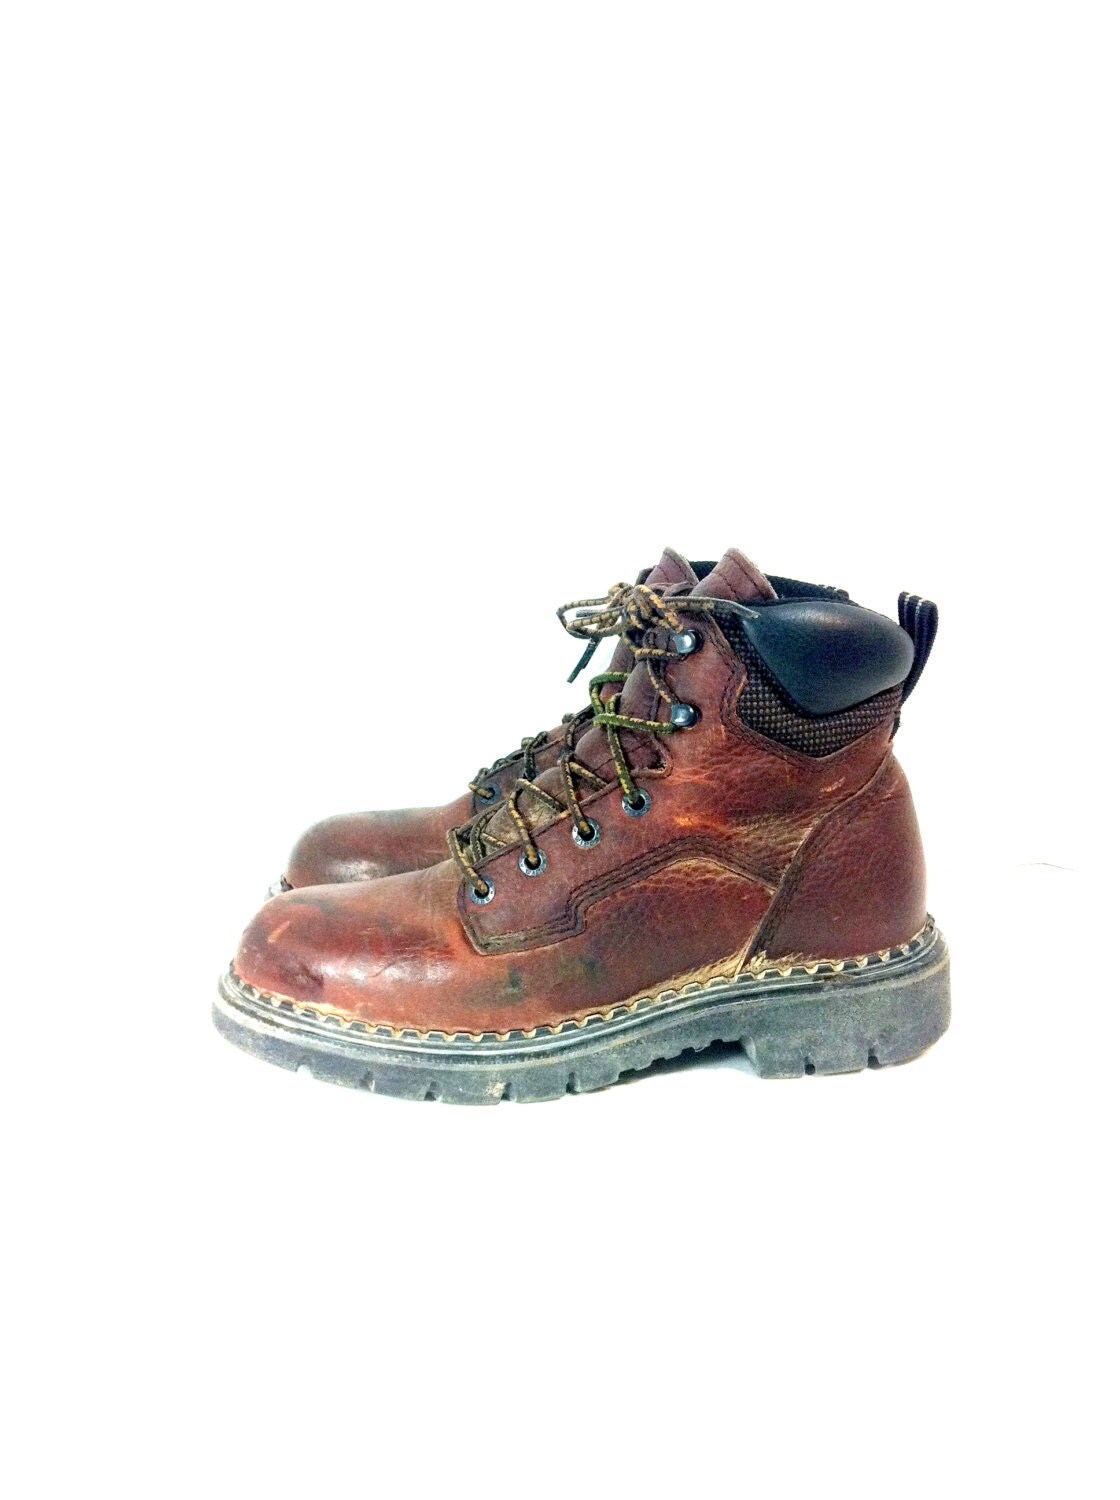 Red Wing Leather Hiking Boots 7 Womens Steel Toe Boots 7